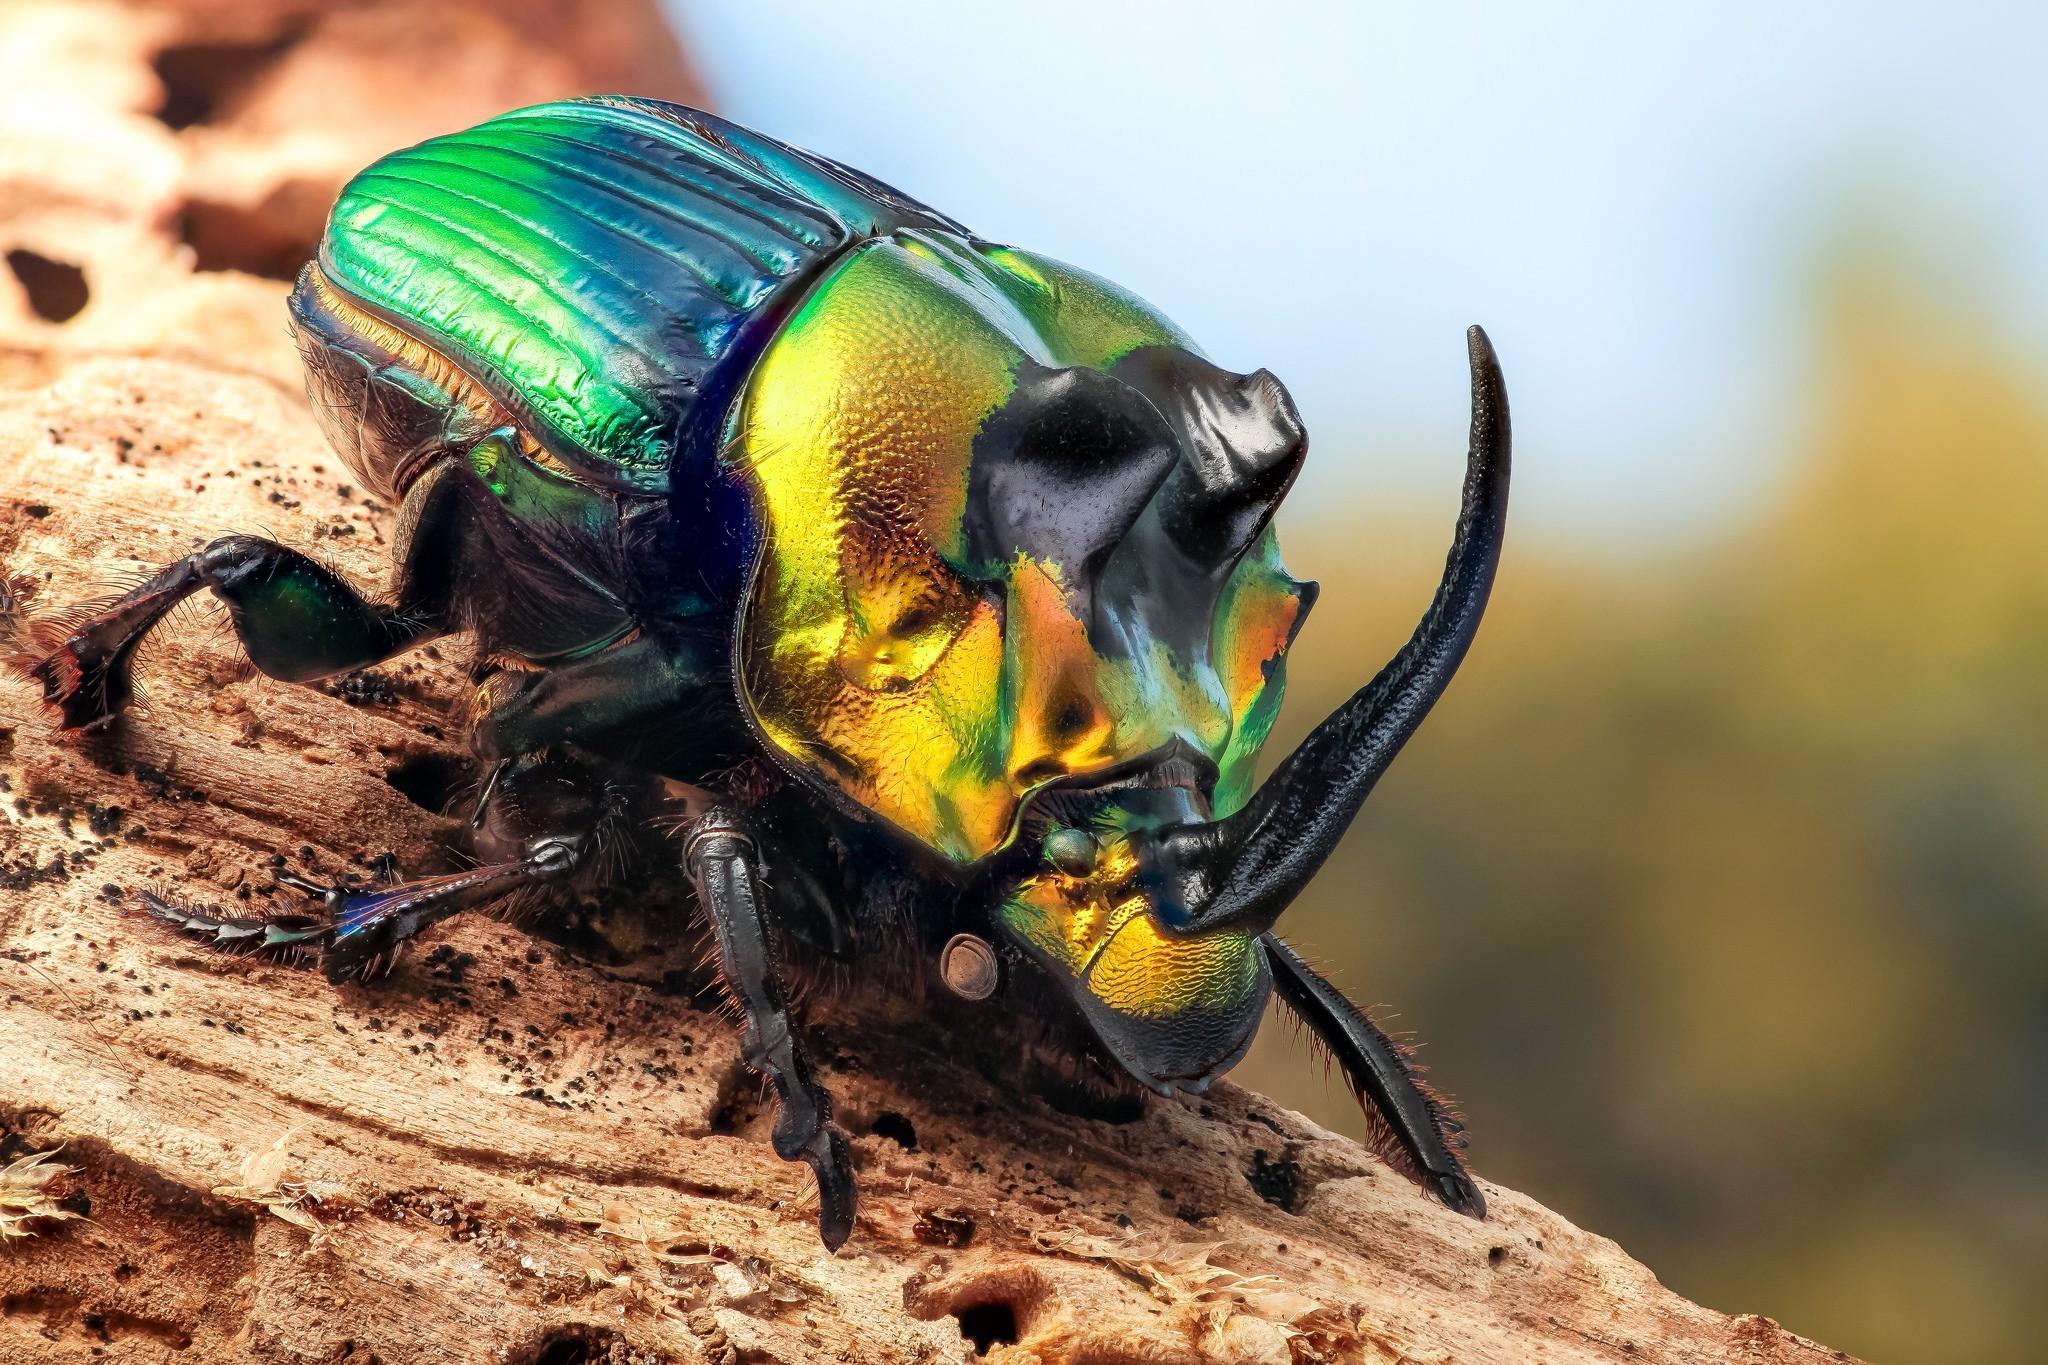 Beetle Insect Wallpaper 4k, Beetle Insect, Animal